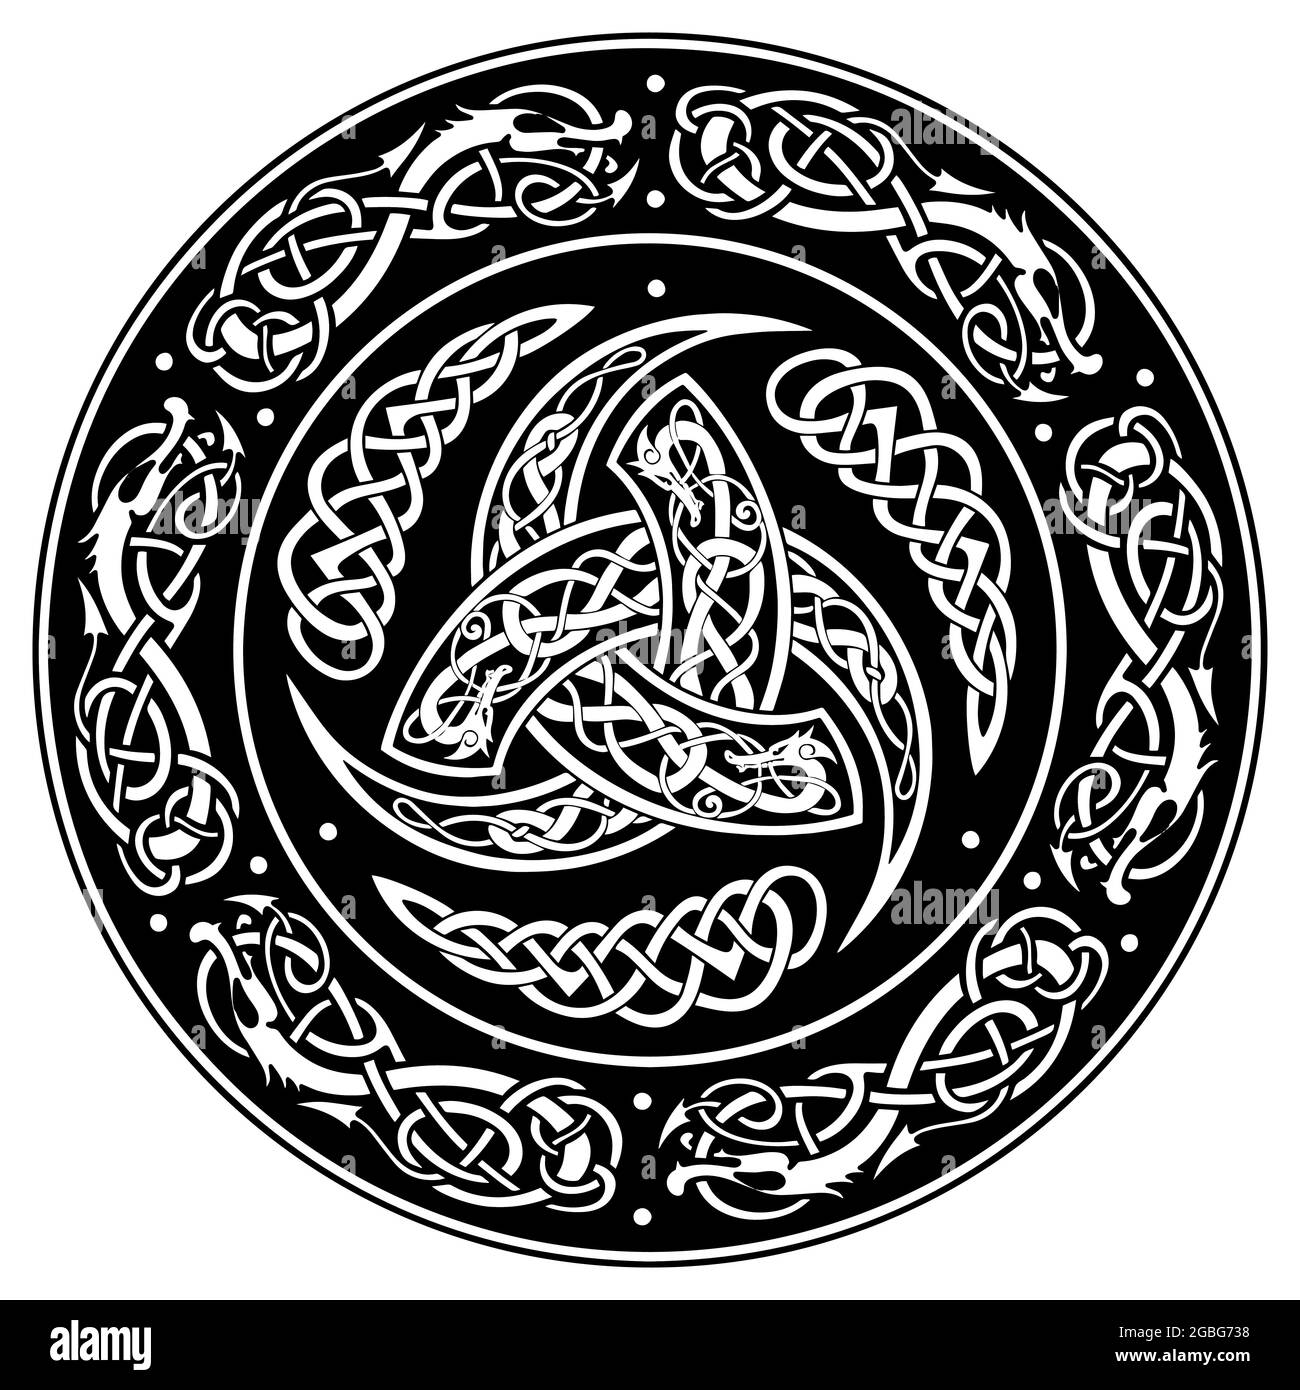 Celtic shield, decorated with a ancient European pattern Stock Vector